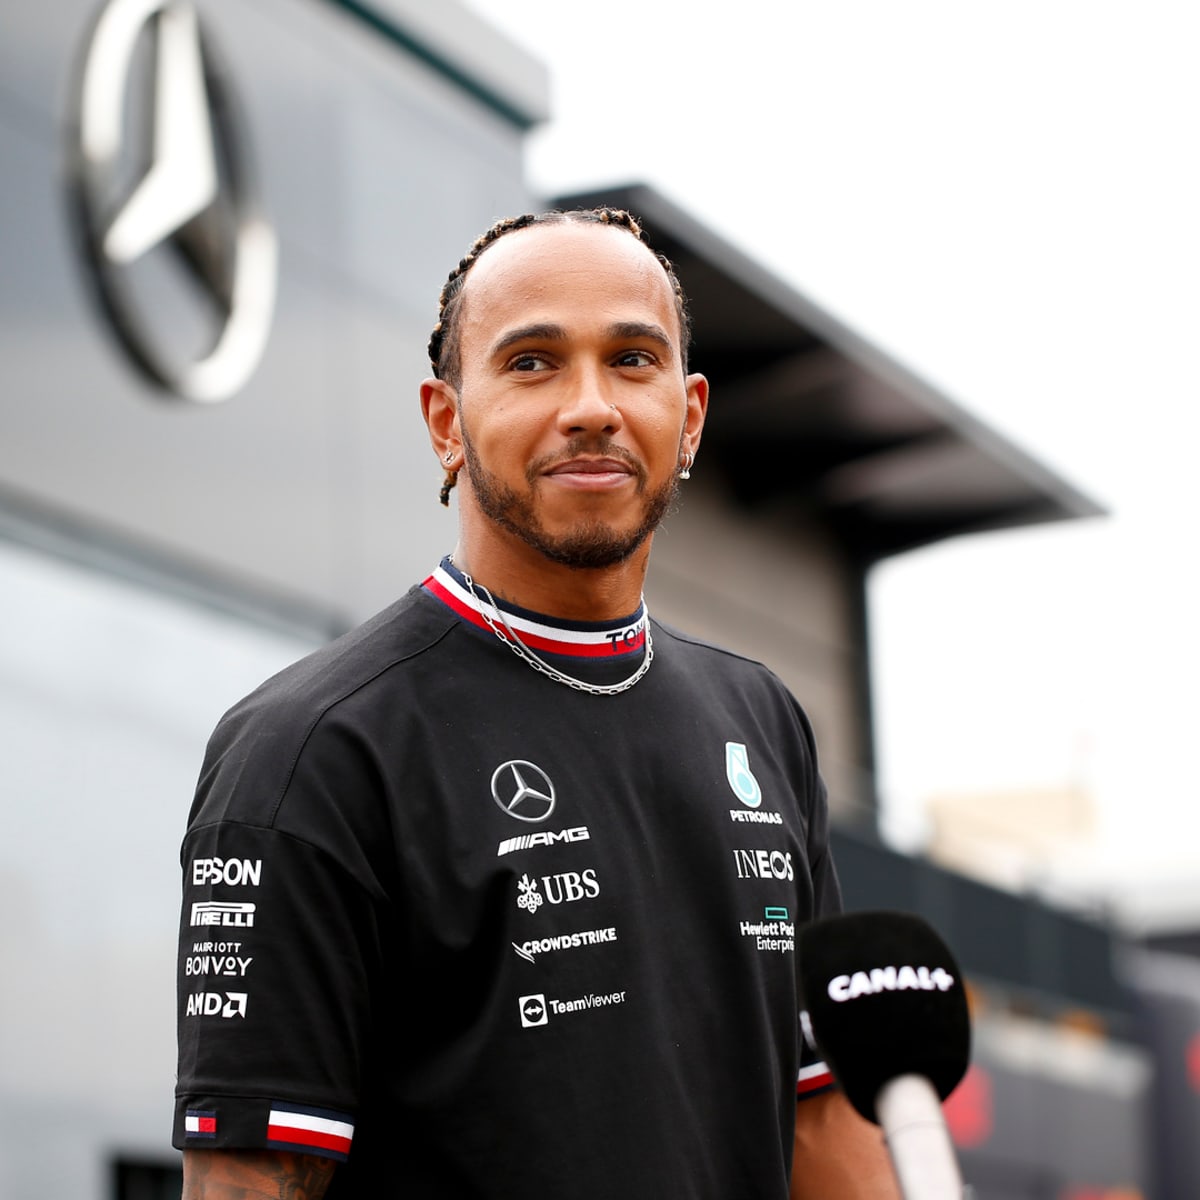 F1 News: Lewis Hamilton's Big Reveal About His Formula 1 Future - Better  To Take A Sabbatical - F1 Briefings: Formula 1 News, Rumors, Standings and  More